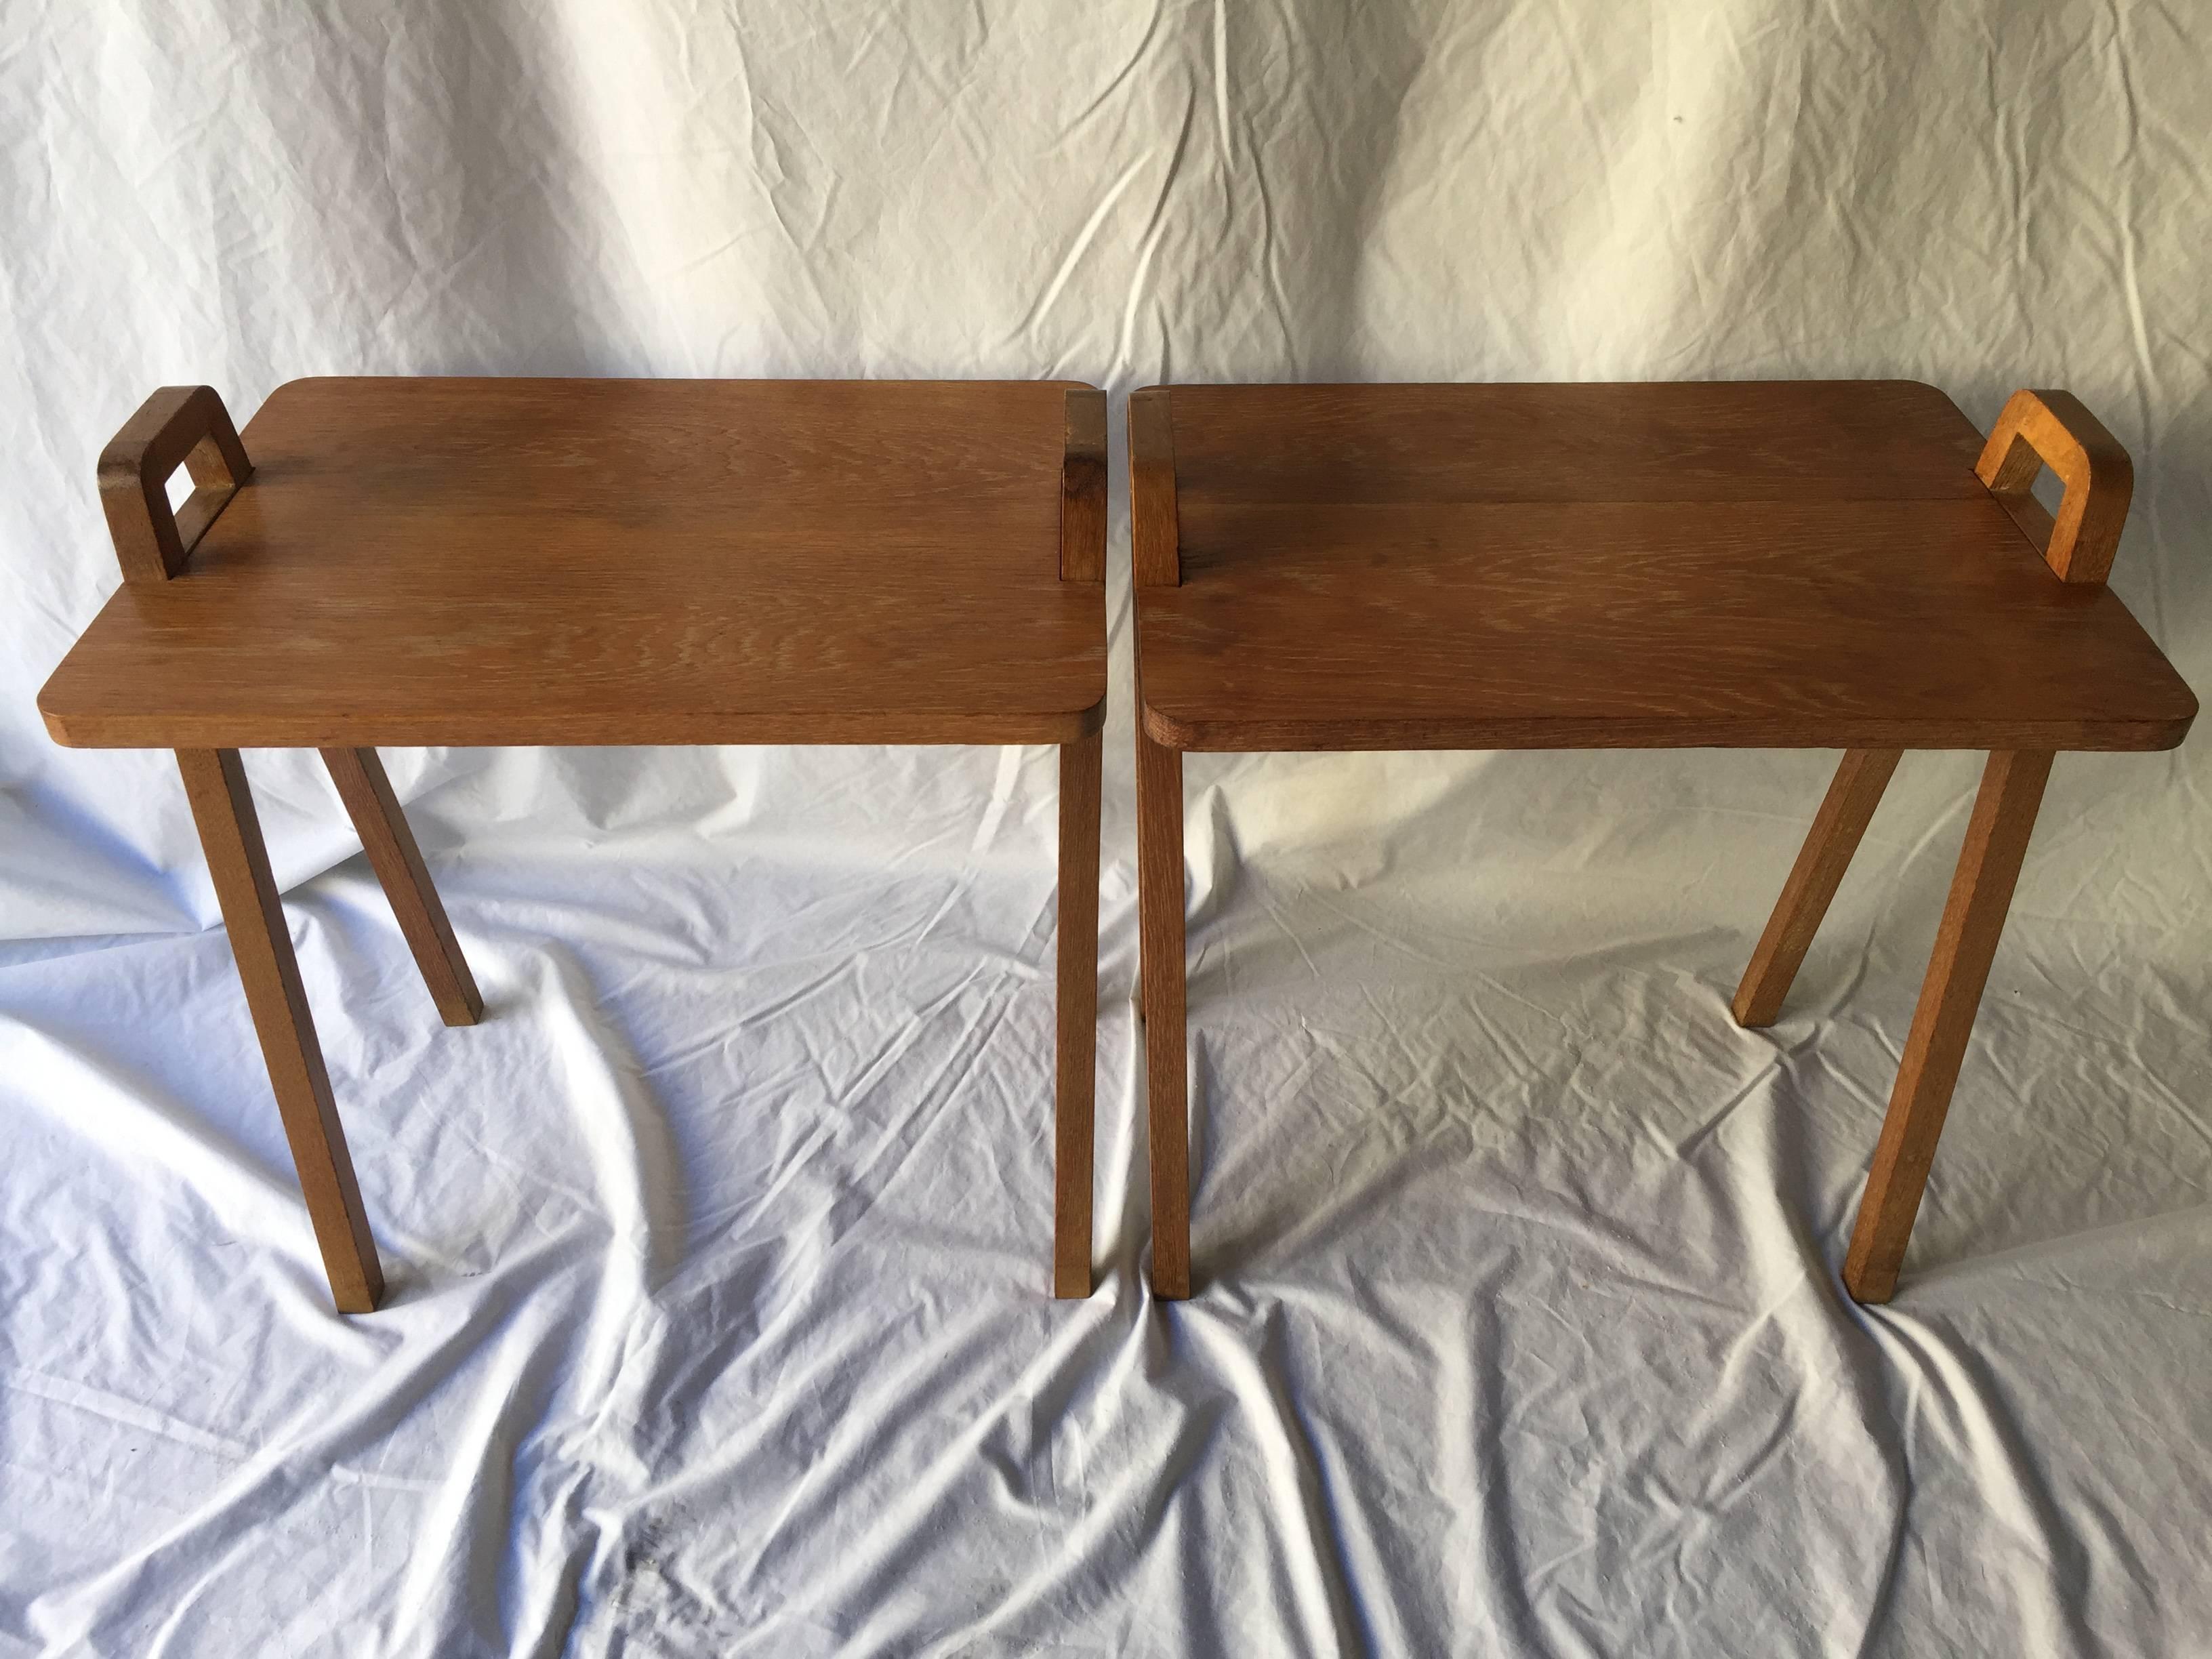 Pair of Mid-Century Unusual Oak Tray Style Tables with Compass Legs and Handles 1